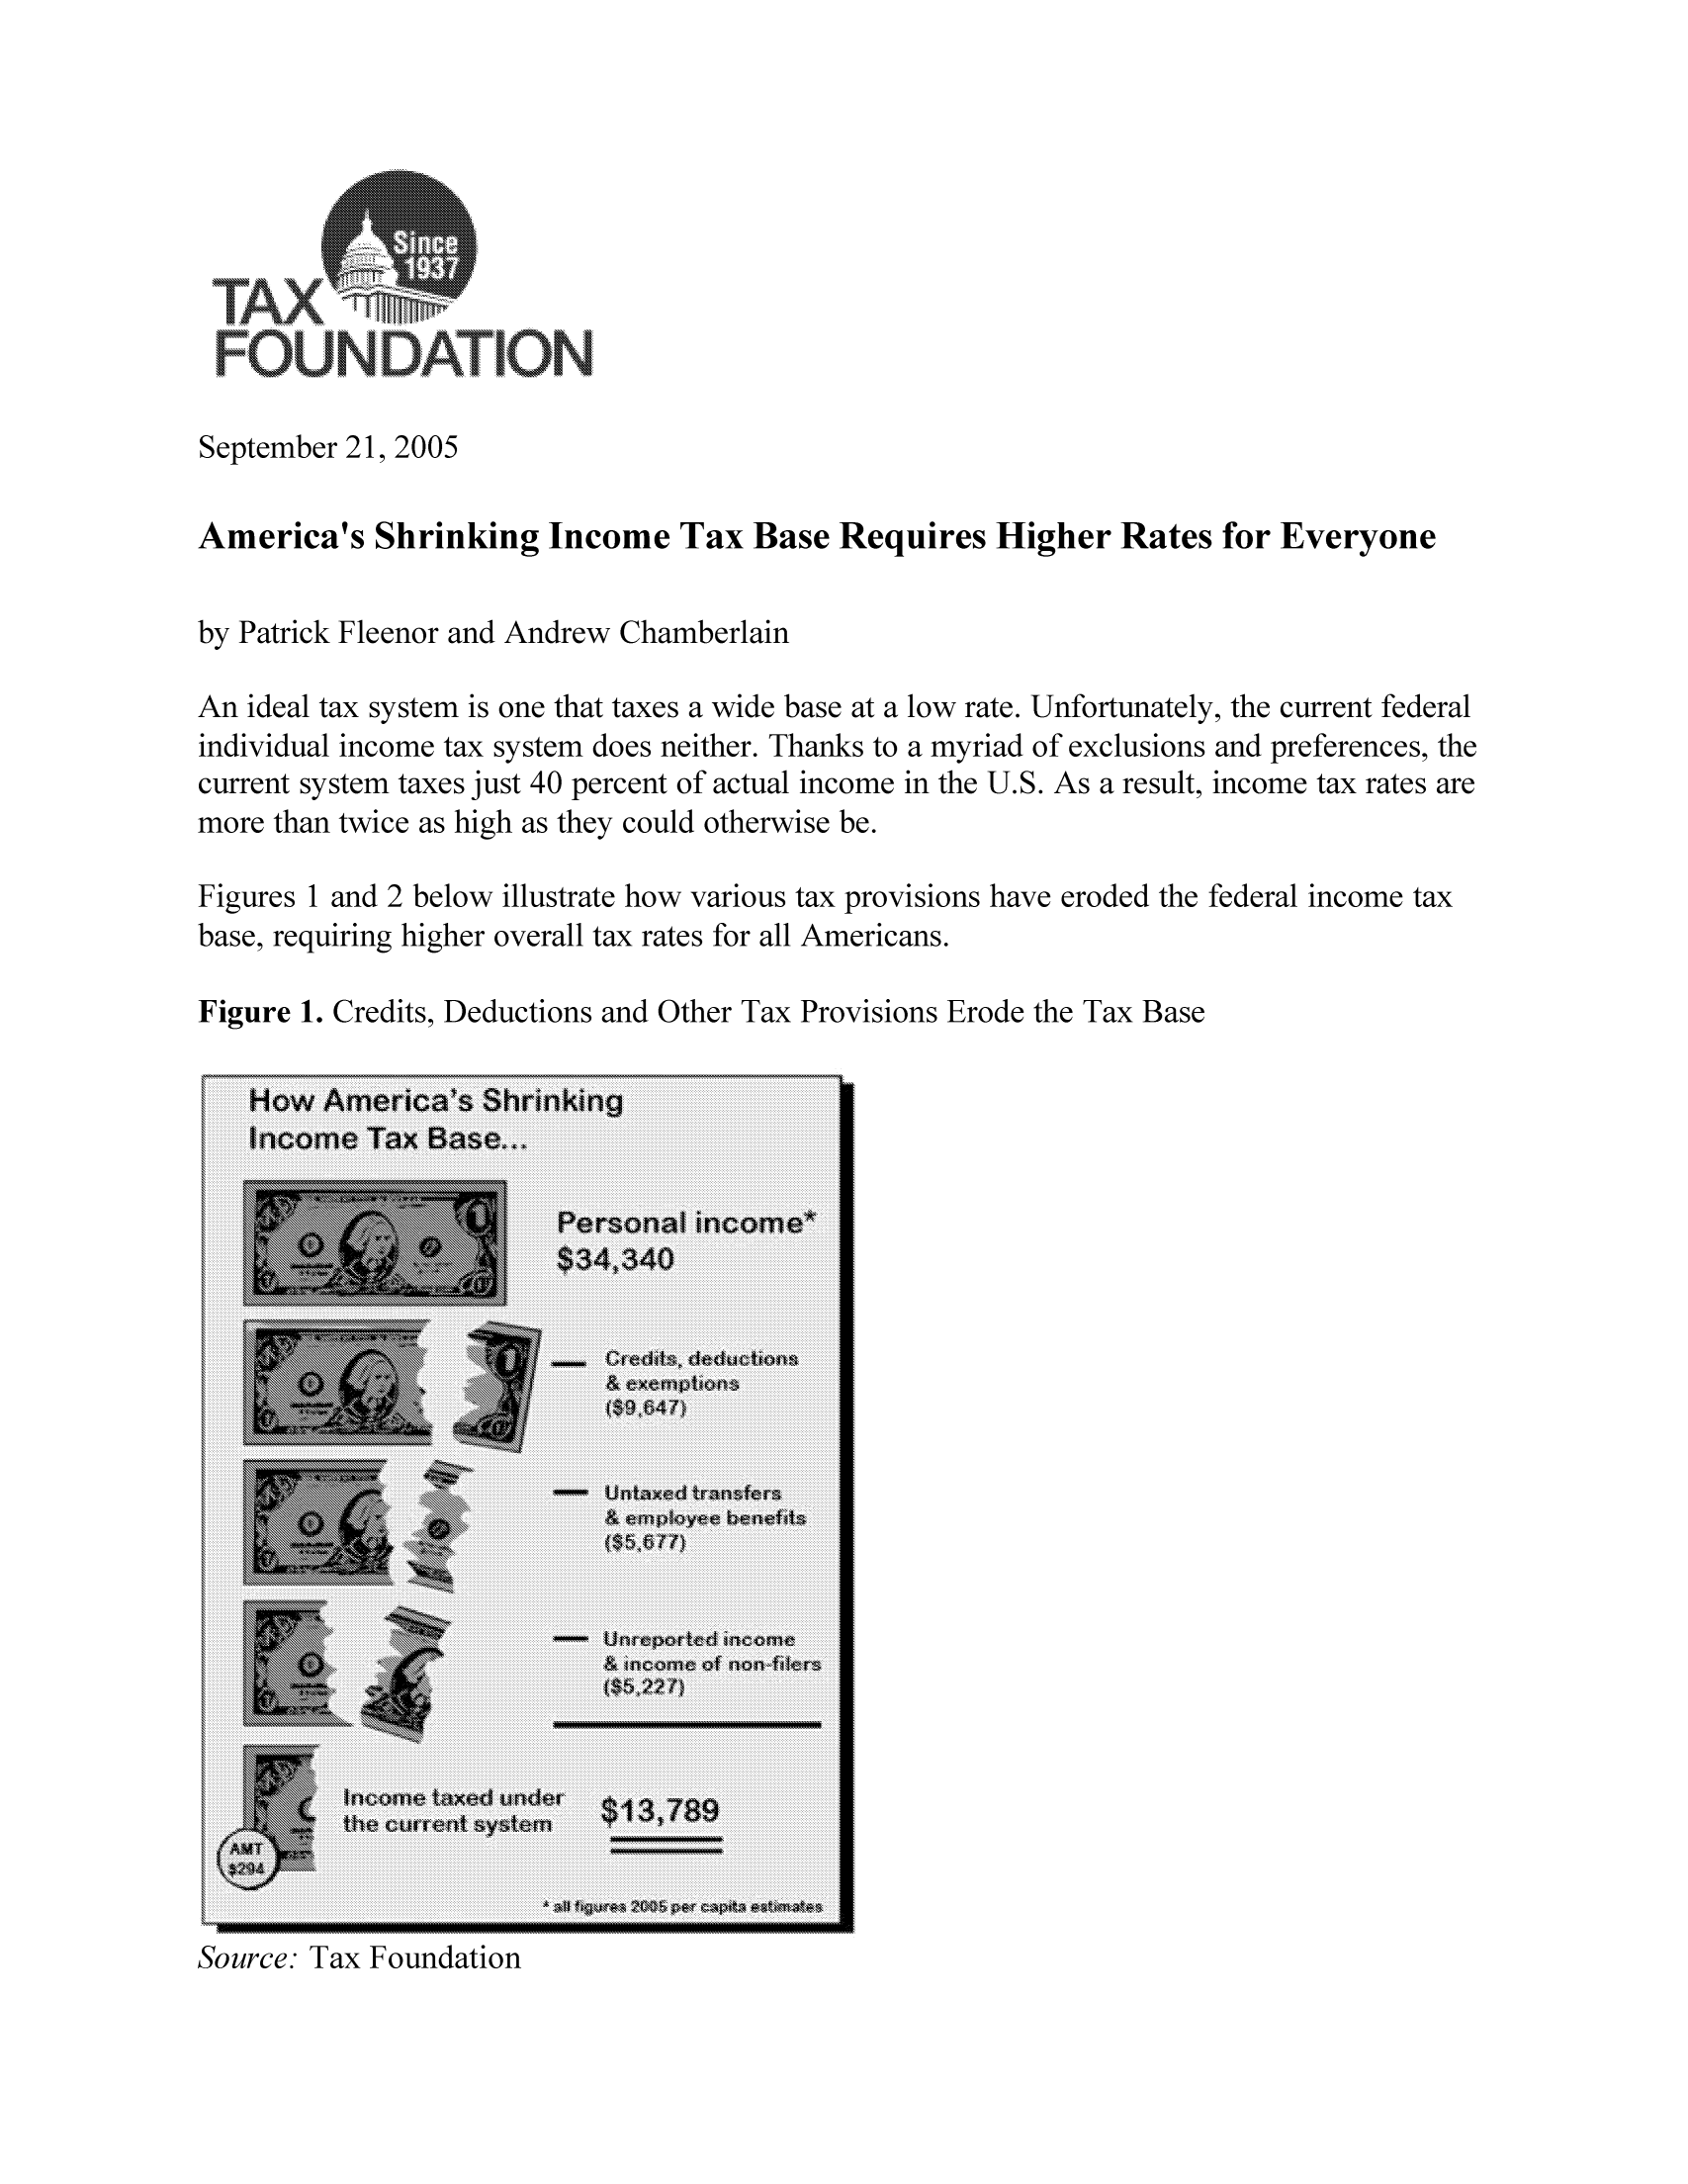 handle is hein.taxfoundation/ffdaxz0001 and id is 1 raw text is: FOUNATOSeptember 21, 2005America's Shrinking Income Tax Base Requires Higher Rates for Everyoneby Patrick Fleenor and Andrew ChamberlainAn ideal tax system is one that taxes a wide base at a low rate. Unfortunately, the current federalindividual income tax system does neither. Thanks to a myriad of exclusions and preferences, thecurrent system taxes just 40 percent of actual income in the U.S. As a result, income tax rates aremore than twice as high as they could otherwise be.Figures 1 and 2 below illustrate how various tax provisions have eroded the federal income taxbase, requiring higher overall tax rates for all Americans.Figure 1. Credits, Deductions and Other Tax Provisions Erode the Tax BaseSource. Tax Foundation...................x 1111 !lillli--- -          ----       --------...............                  ..................................